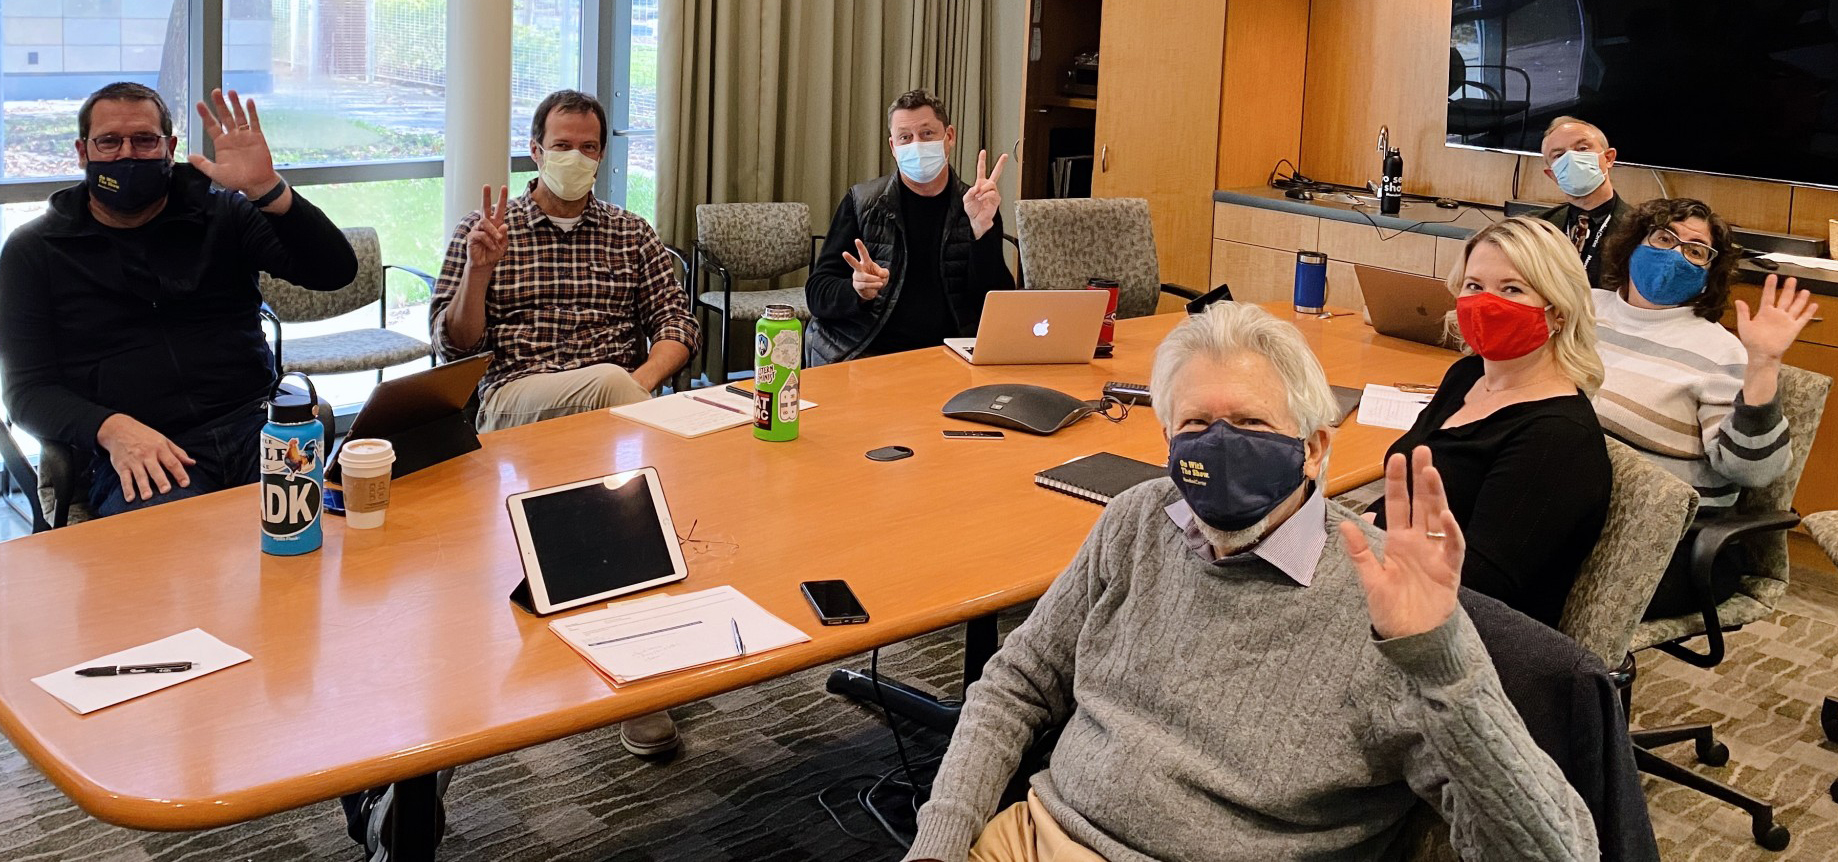 A group of people with COVID masks sit at a meeting table together